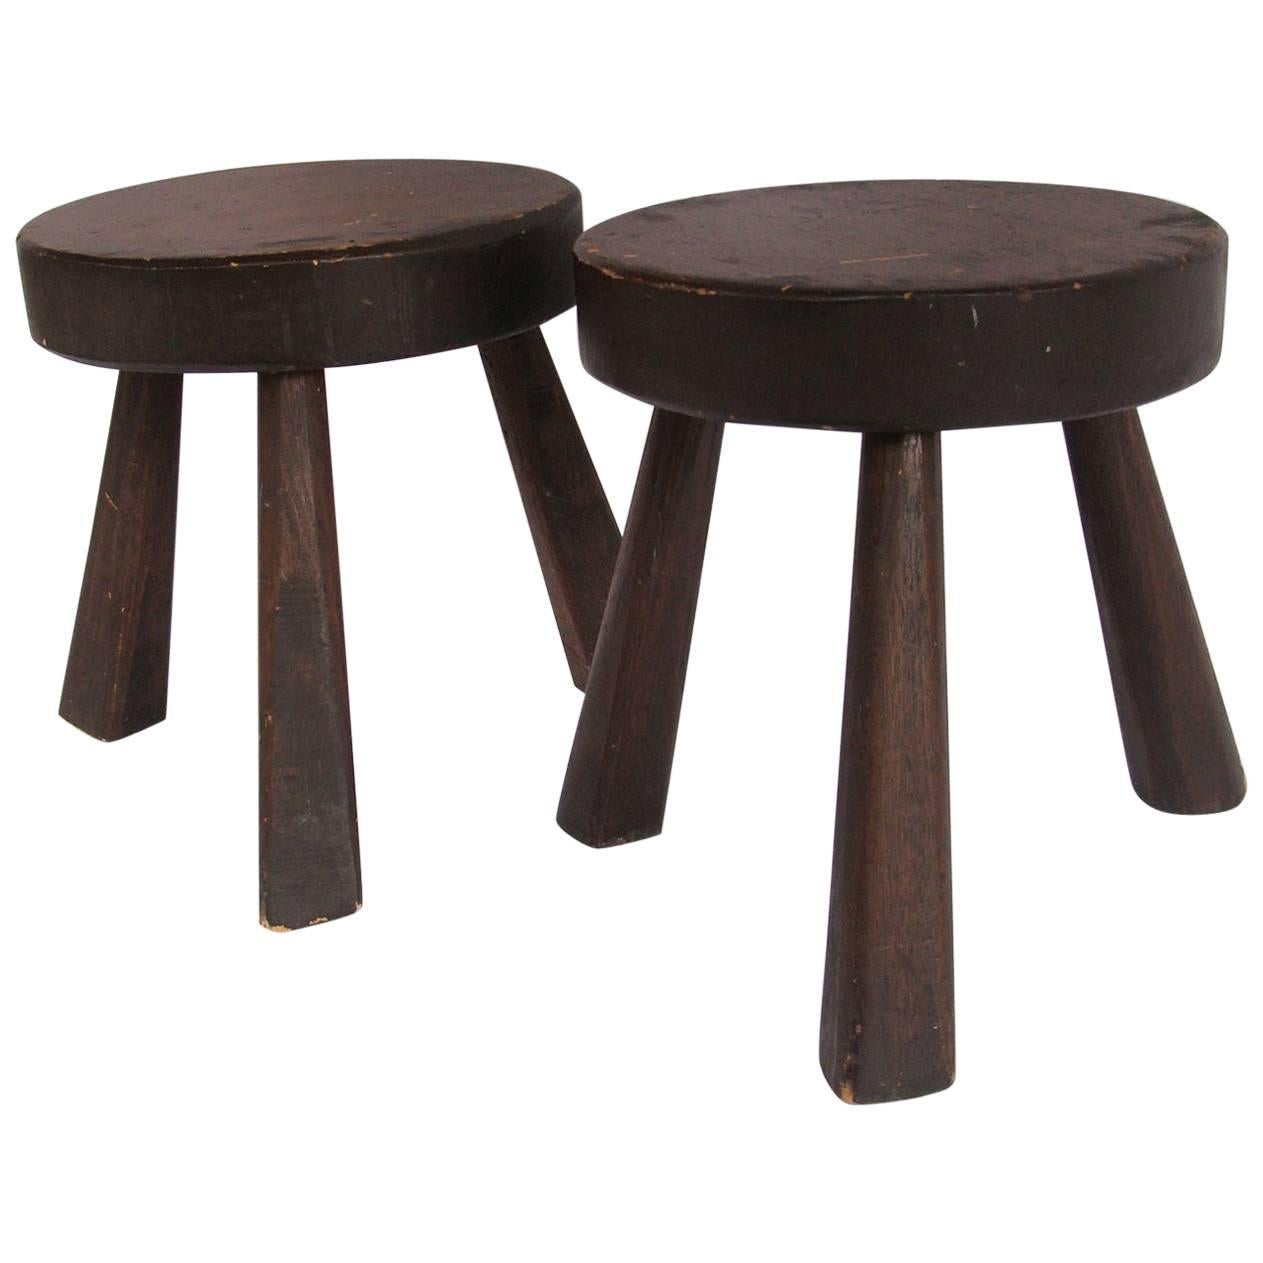 1960s Pair of Wooden Stools